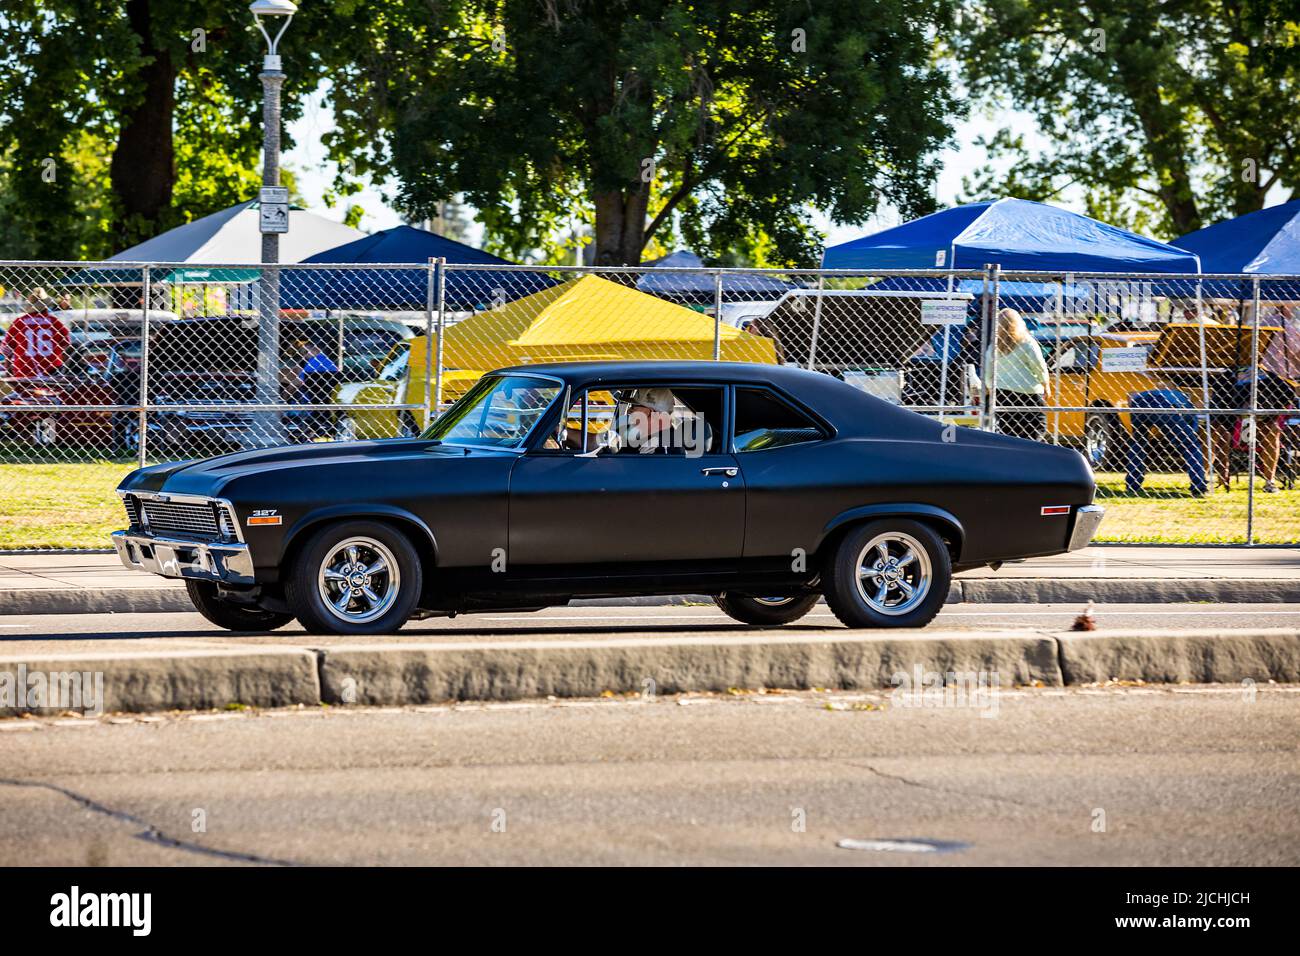 A 1969 Chevy Nova arrives at the American Graffiti charity Car Show at the Modesto Junior College campus June 11-12 2022 Stock Photo